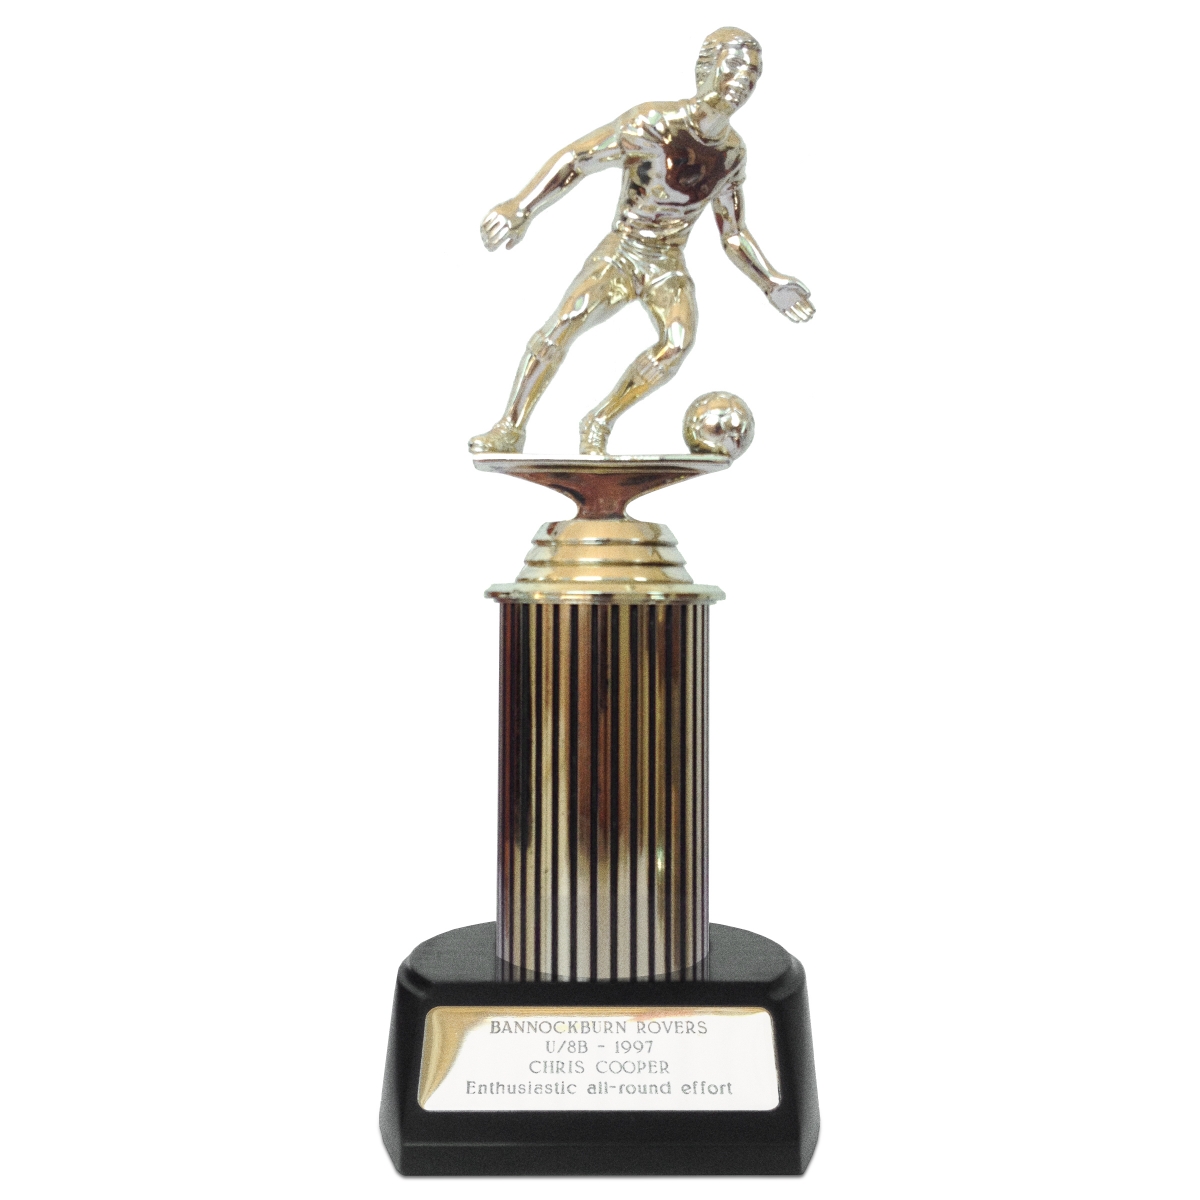 Trophy for enthusiastic all-round effort.